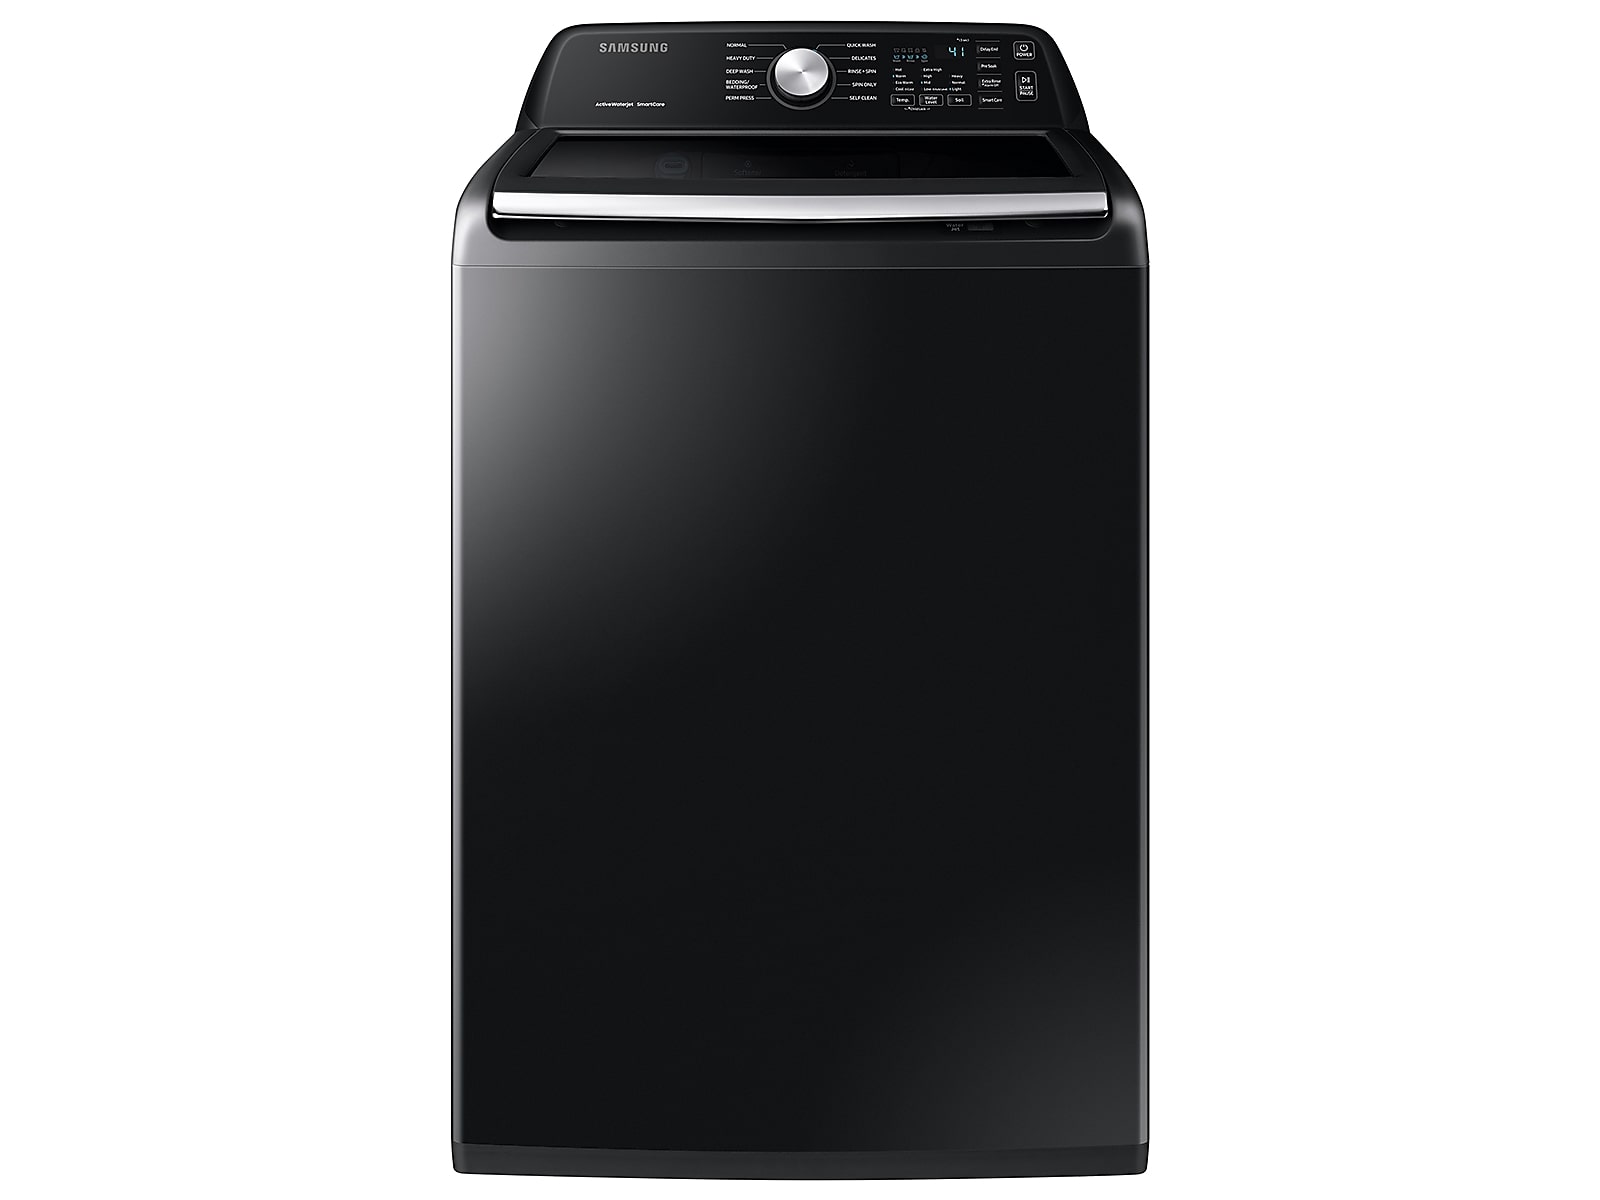 Samsung 4.5 cu. ft. Capacity Top Load Washer with Active WaterJet in Brushed Black(WA45T3400AV/A4)